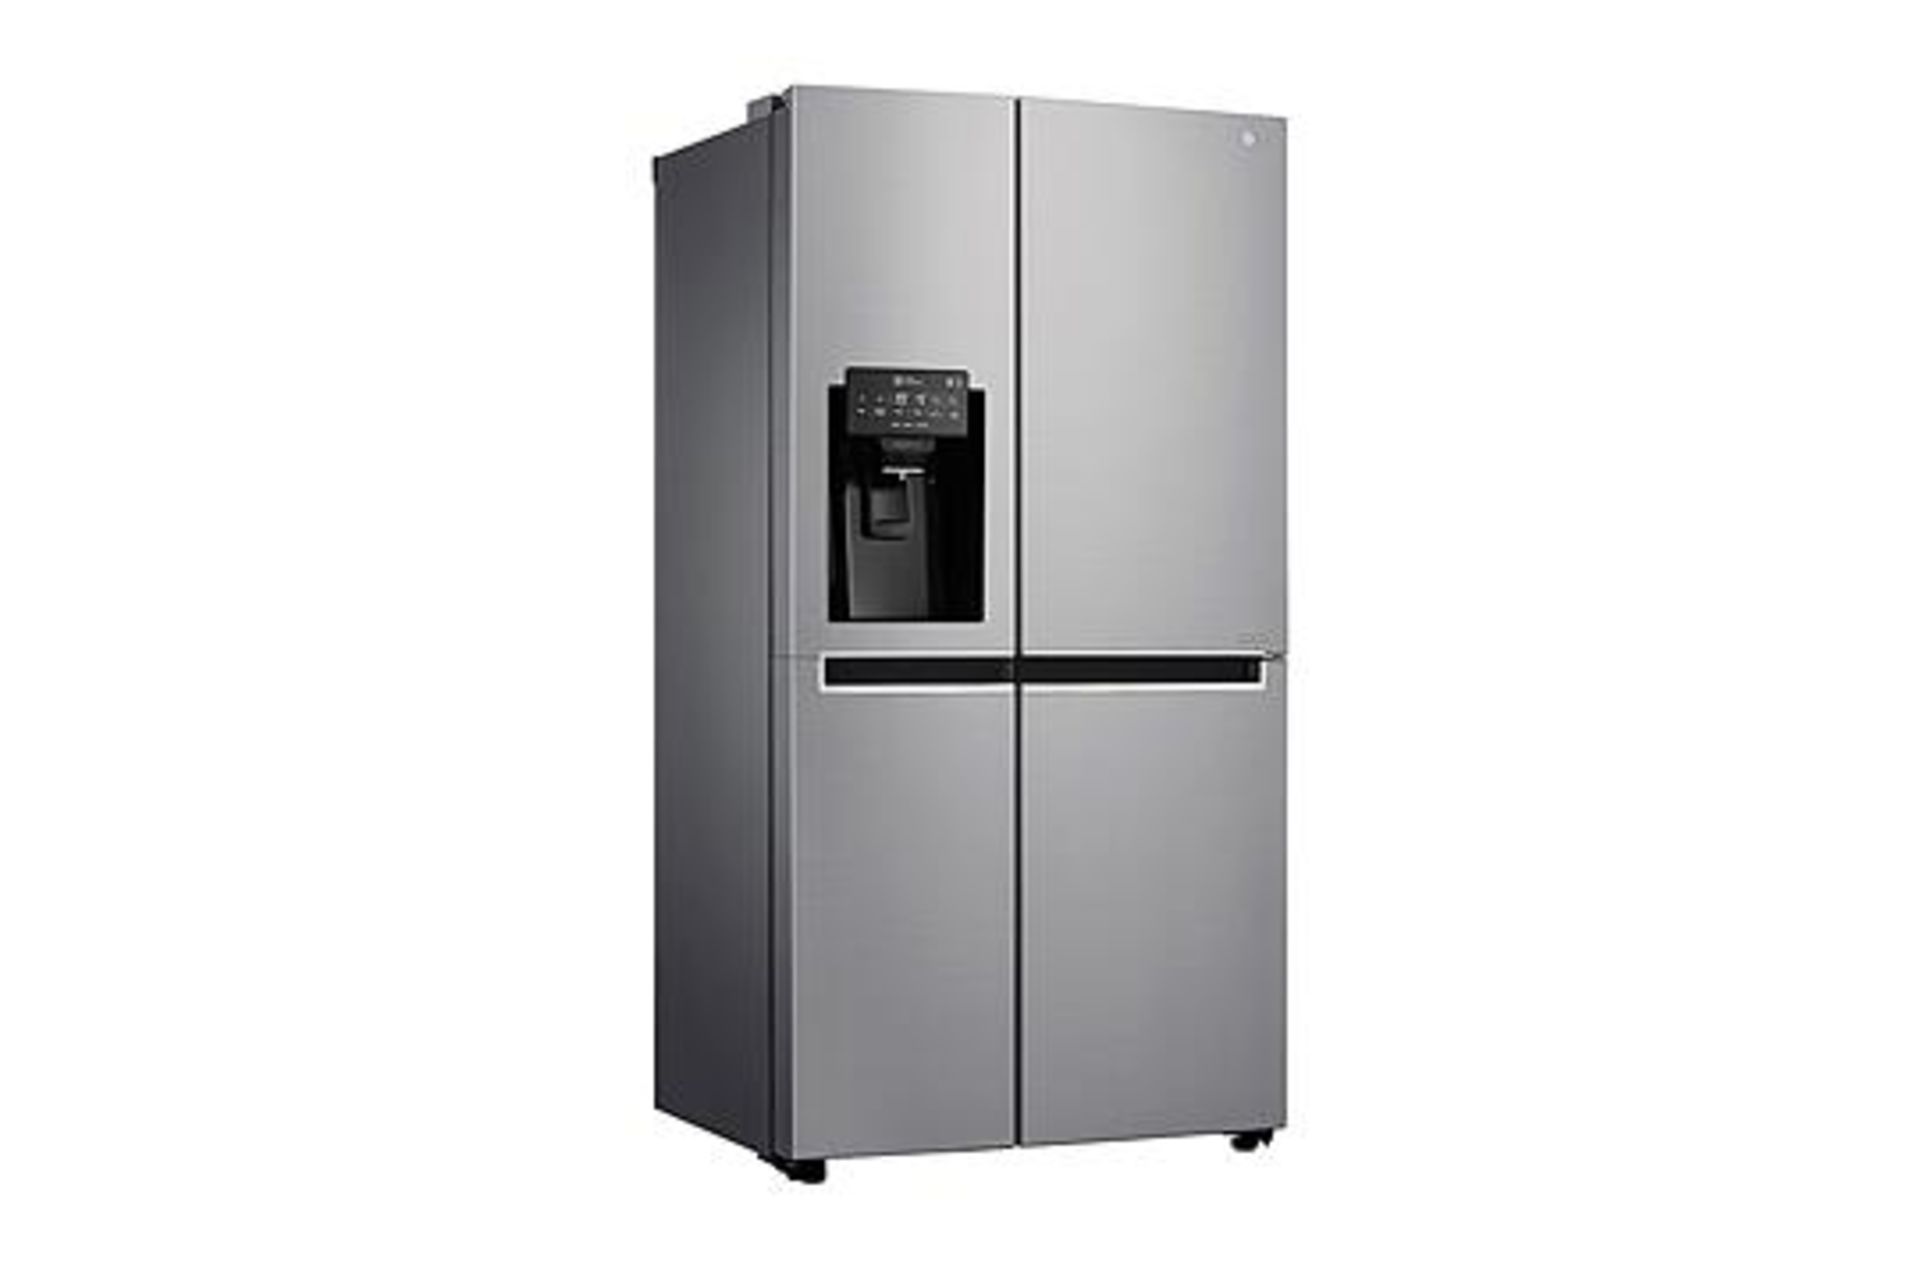 1 x LG GSL961 PXBV Stainless Steel American Style Fridge Freezer With Water and Ice Dispenser - - Image 2 of 8